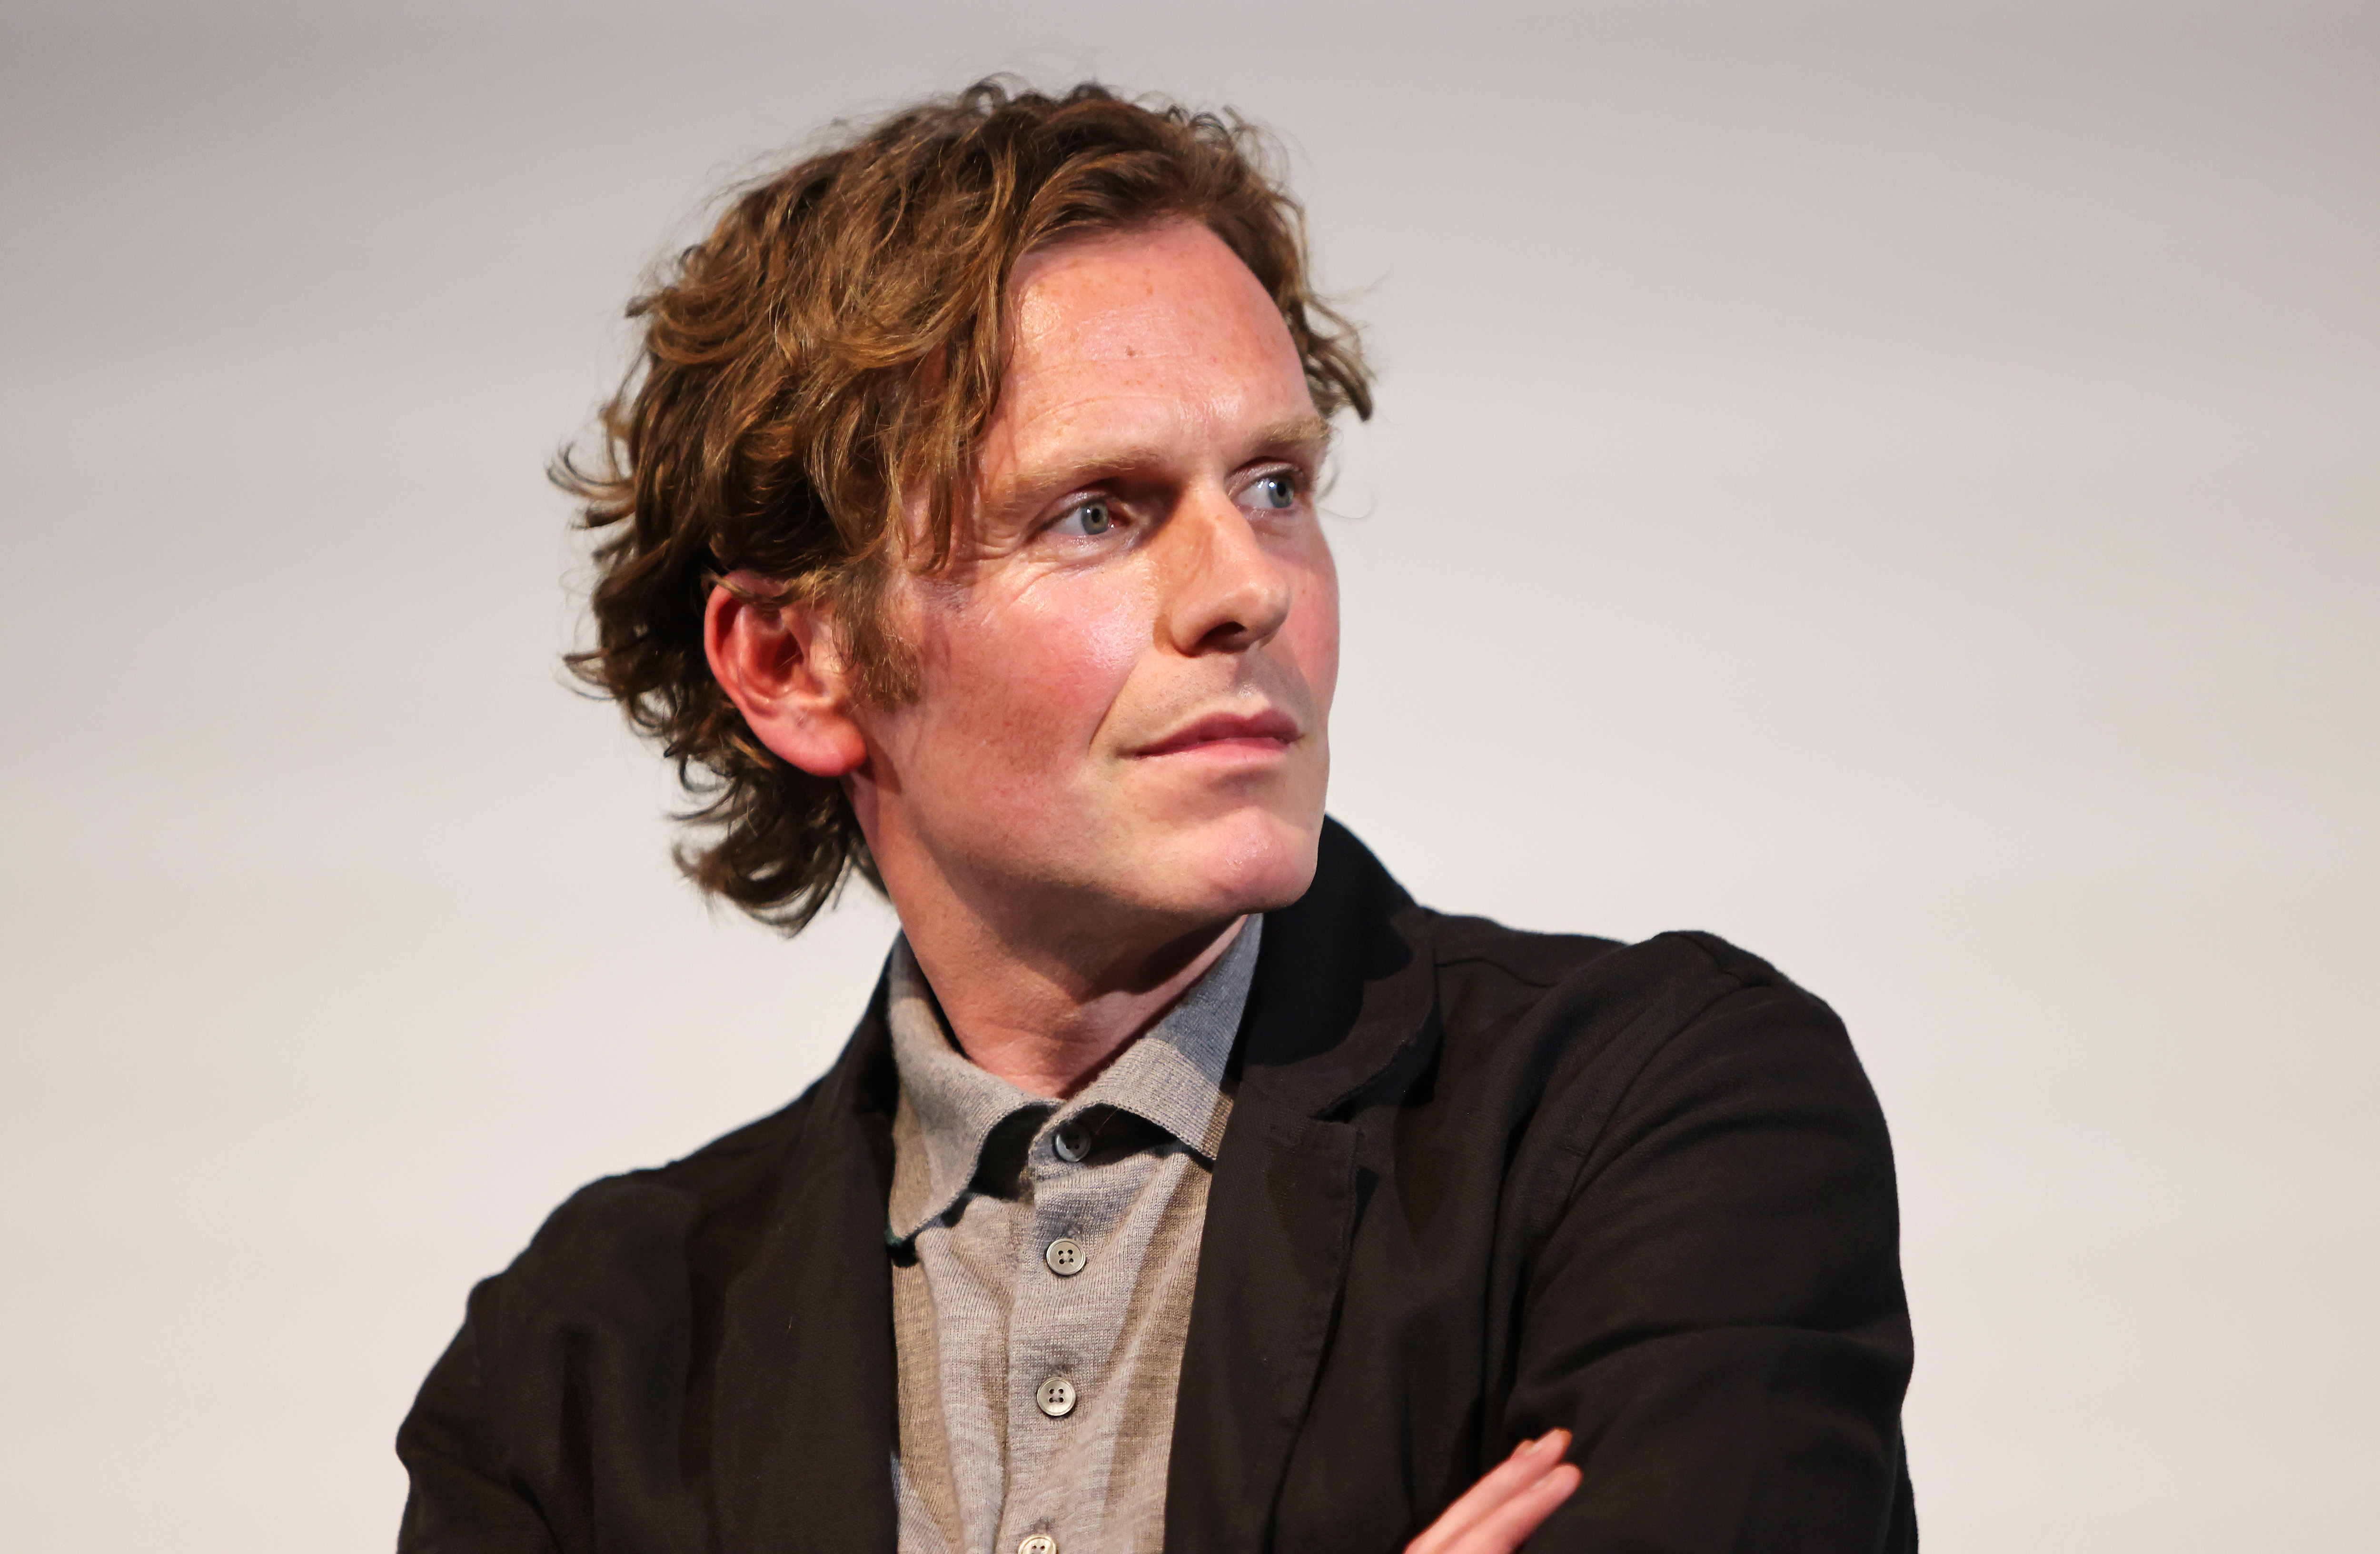 Actor Shaun Evans speaks at a Q&A after the BFI Southbank premiere screening of new BBC drama "Vigil" on August 23, 2021 in London, England | Source: Getty Images